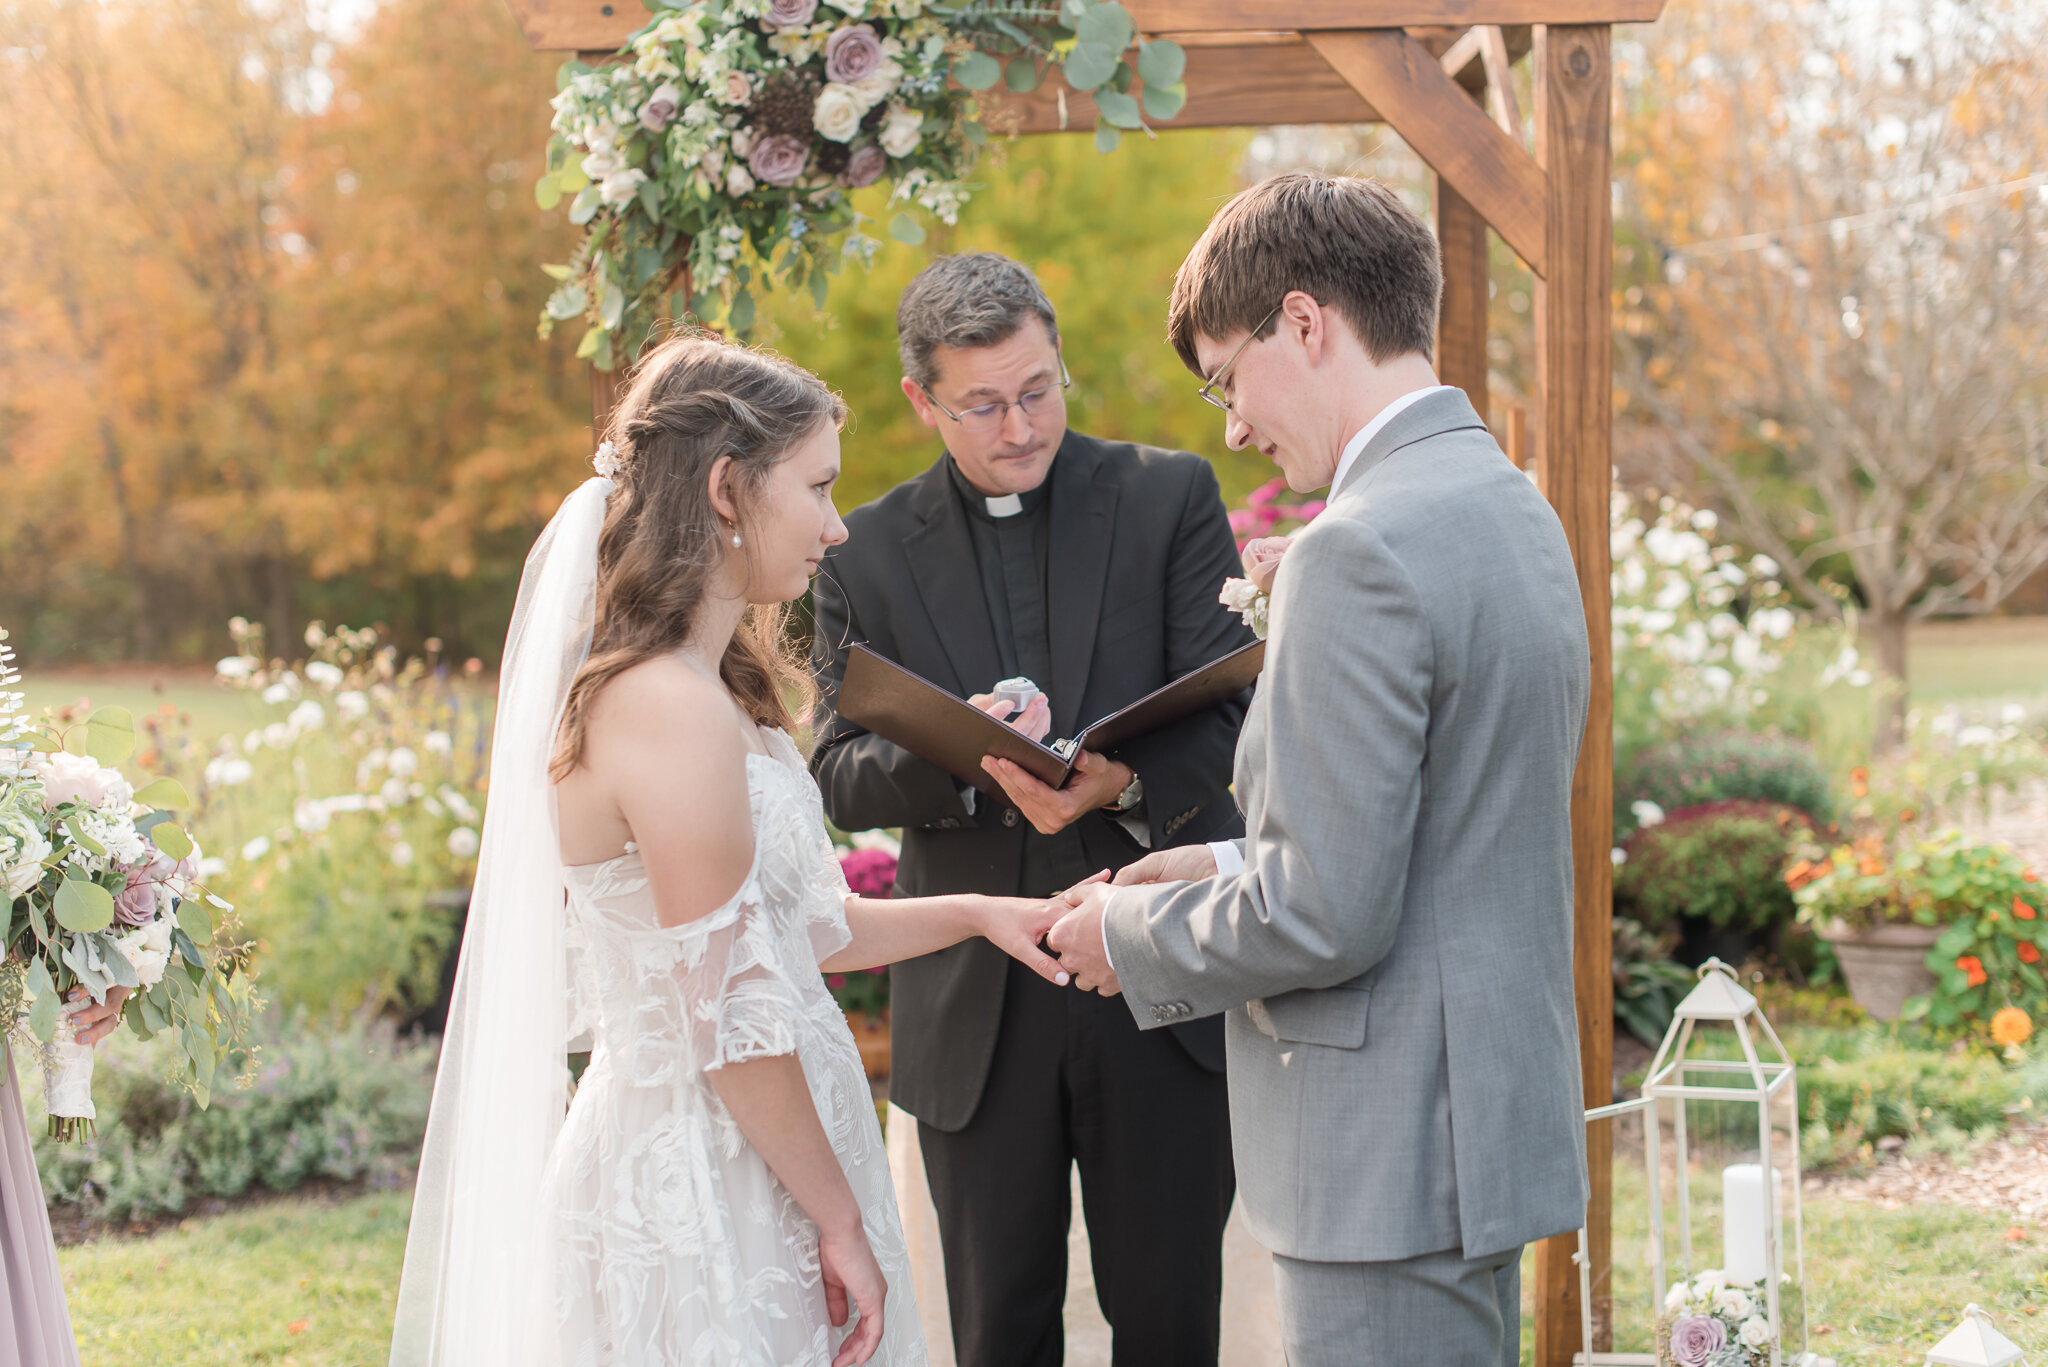 Covid Elopement In Indiana6785.jpg